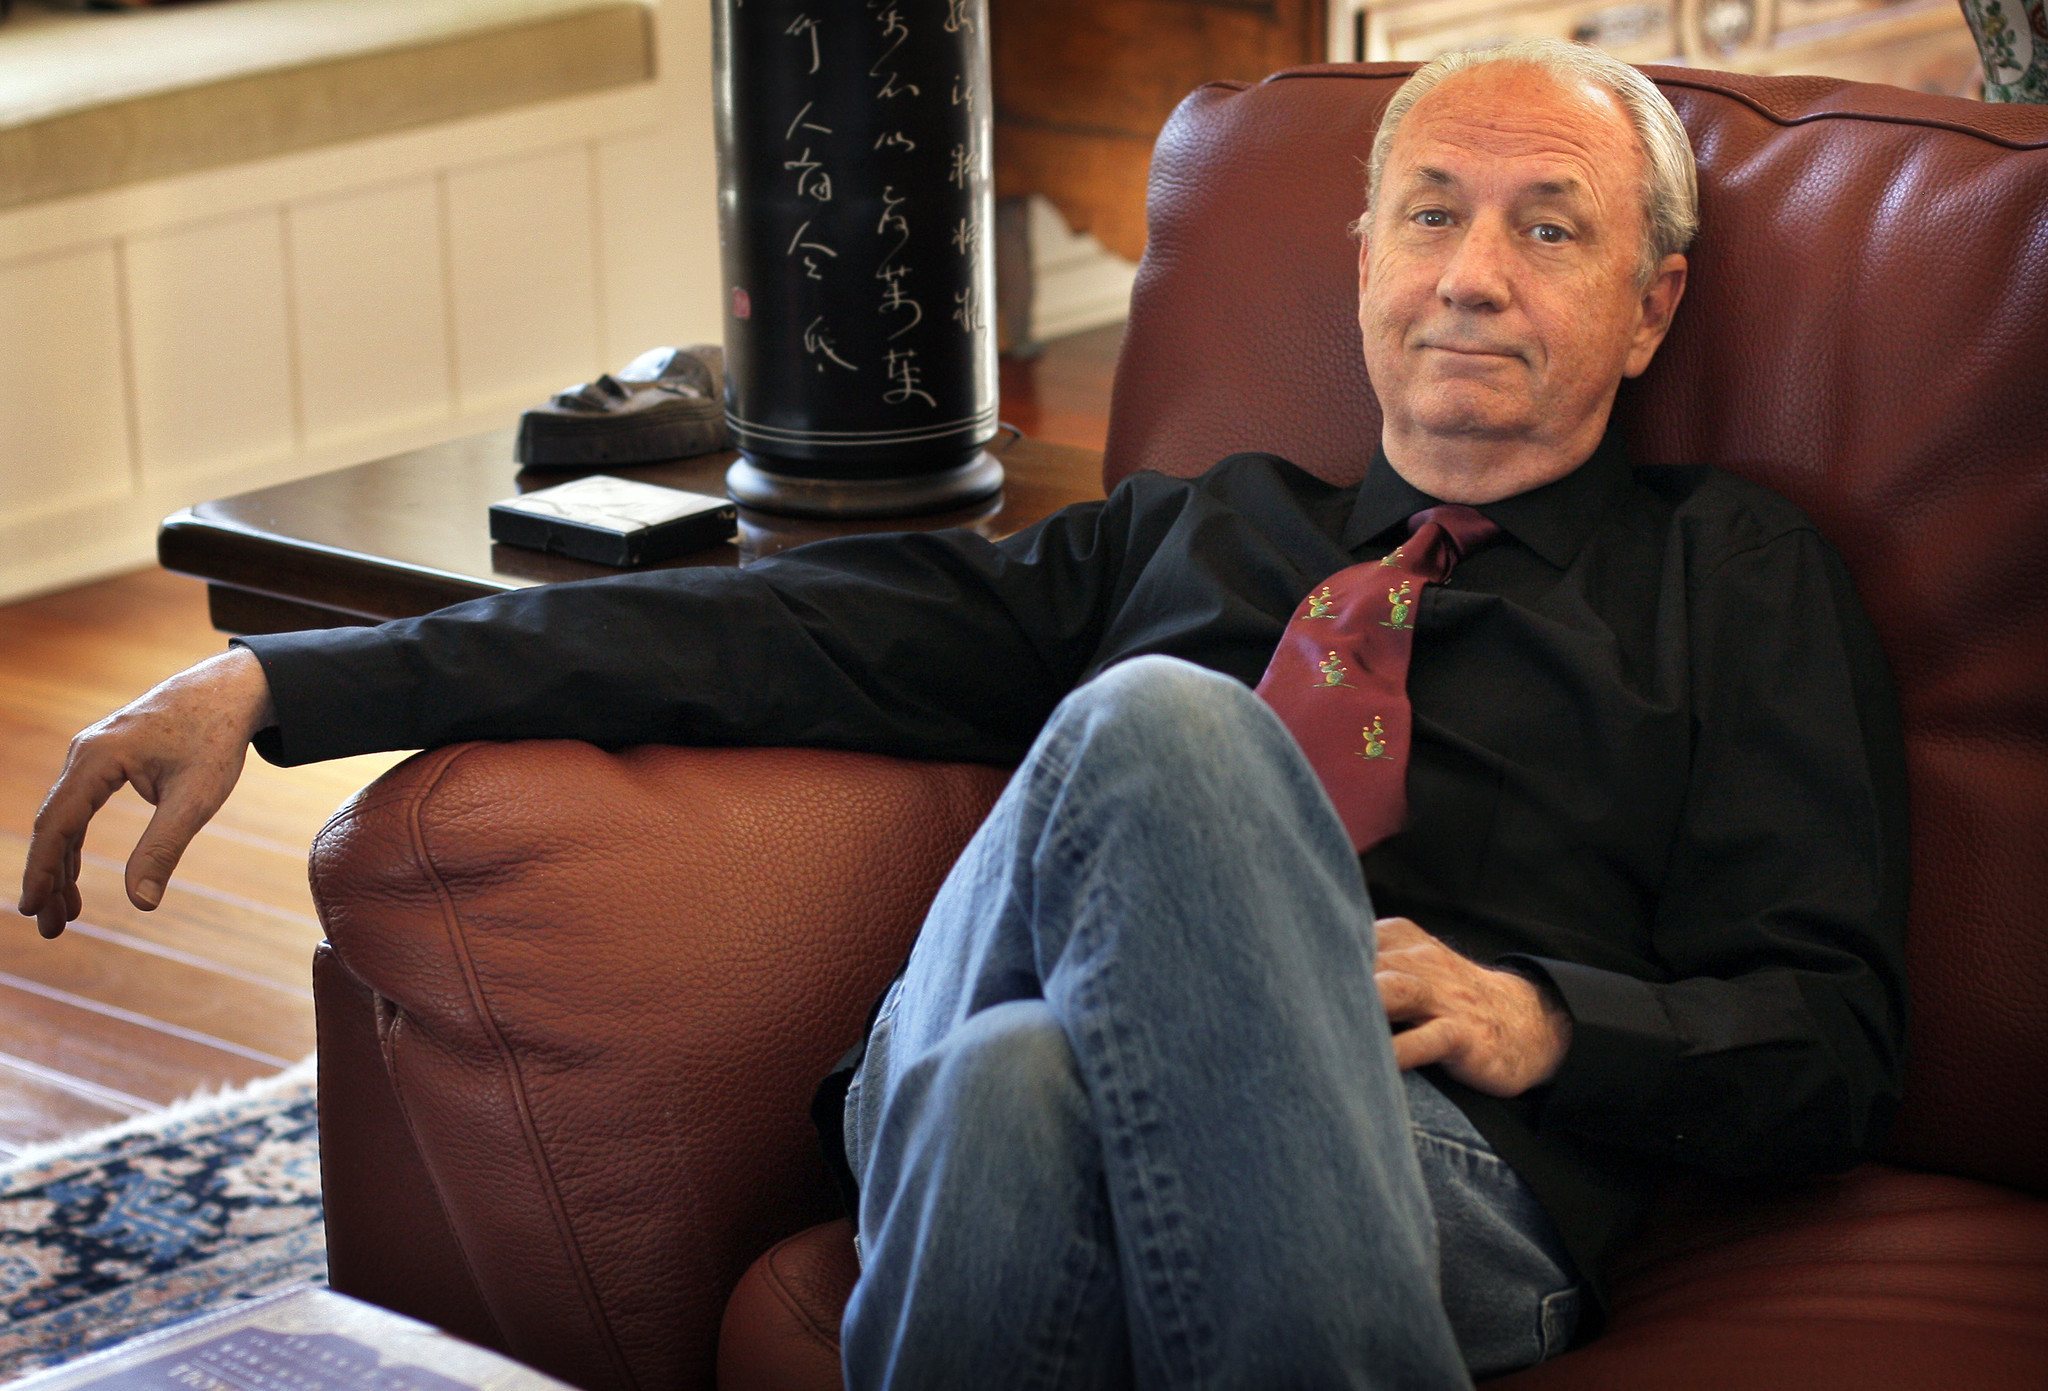 Ex-Monkees Michael Nesmith will show his country roots at Stagecoach